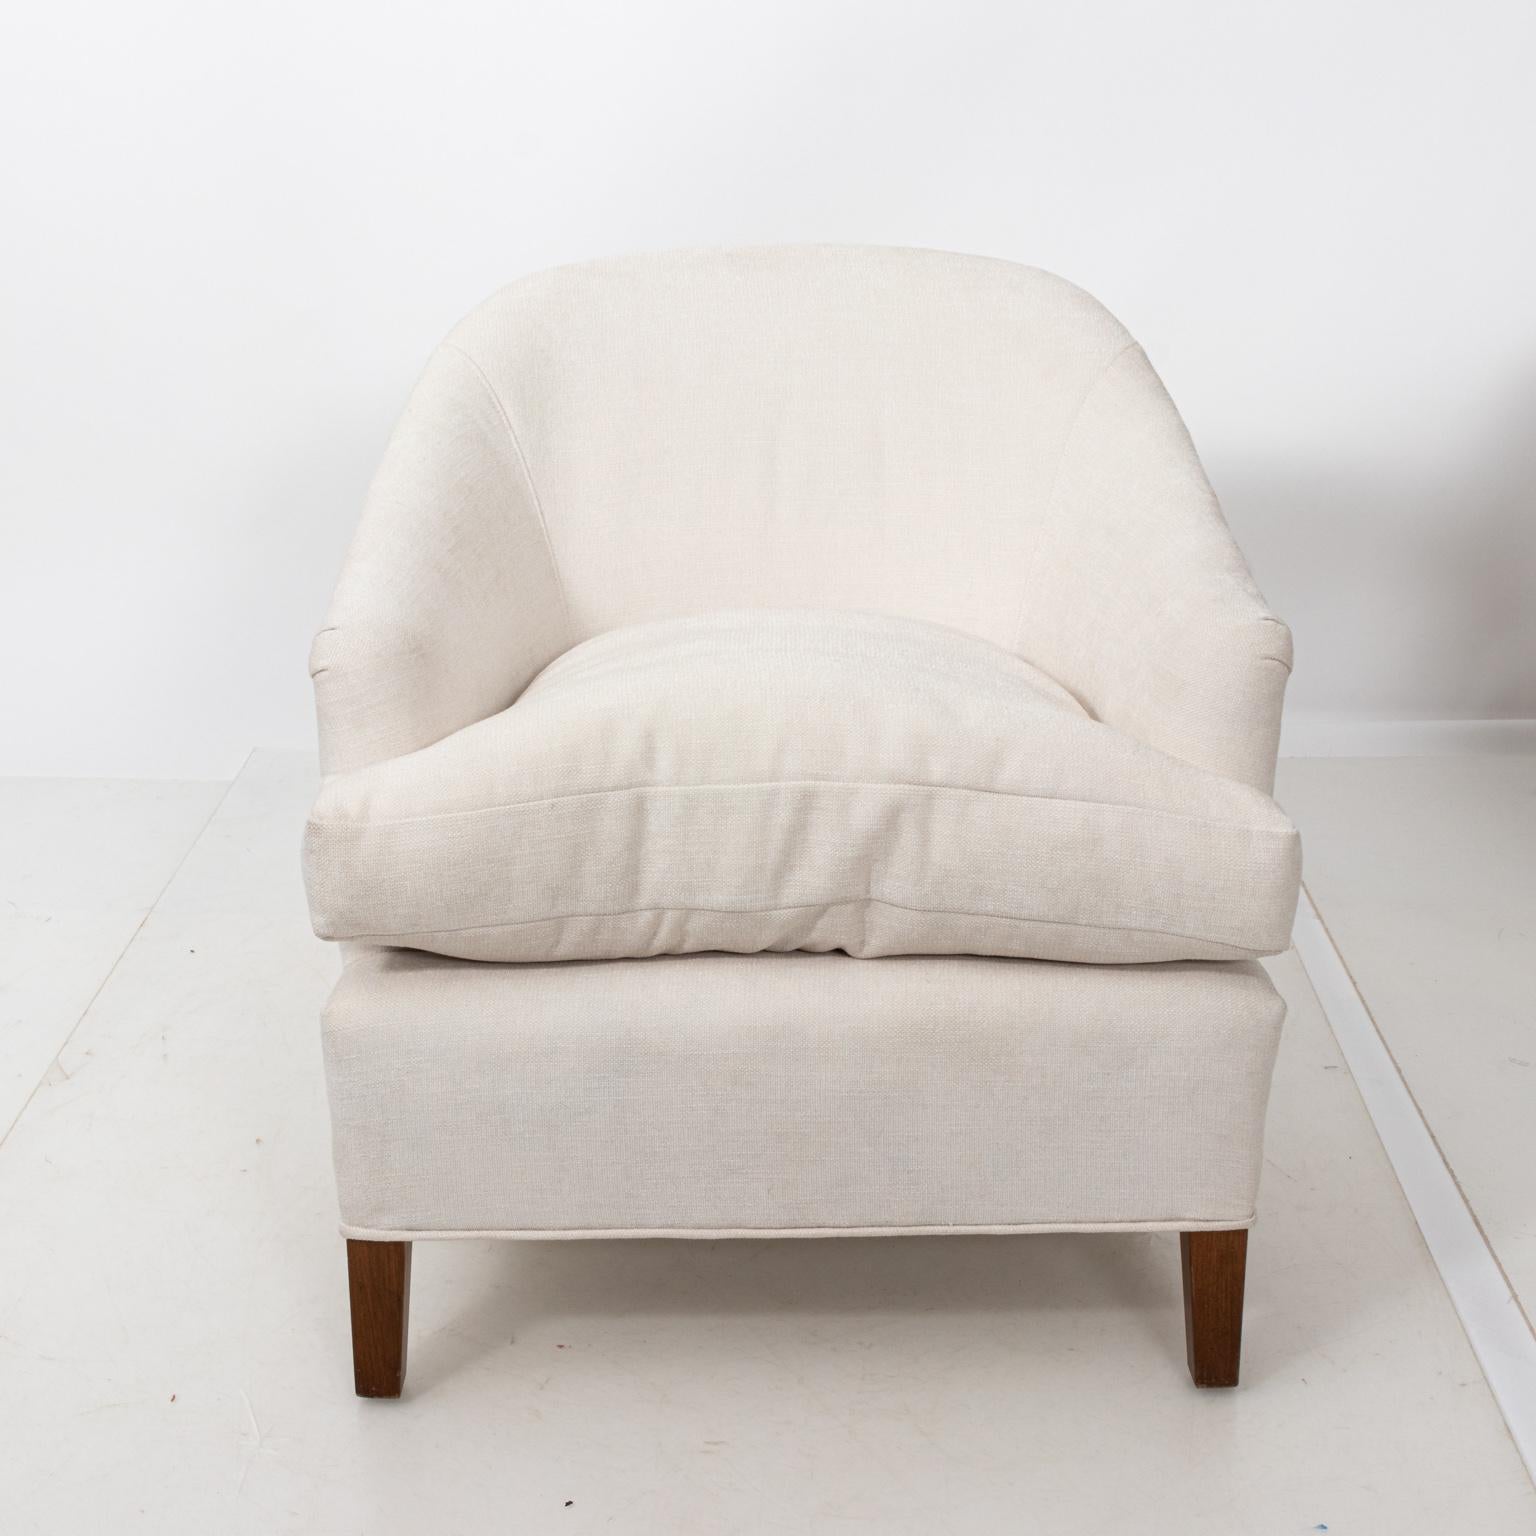 Pair of white upholstered armchairs freshly upholstered with new down feather cushions, circa 1950s. Please note of wear consistent with age including minor finish loss to the wood legs. Made in the United States.